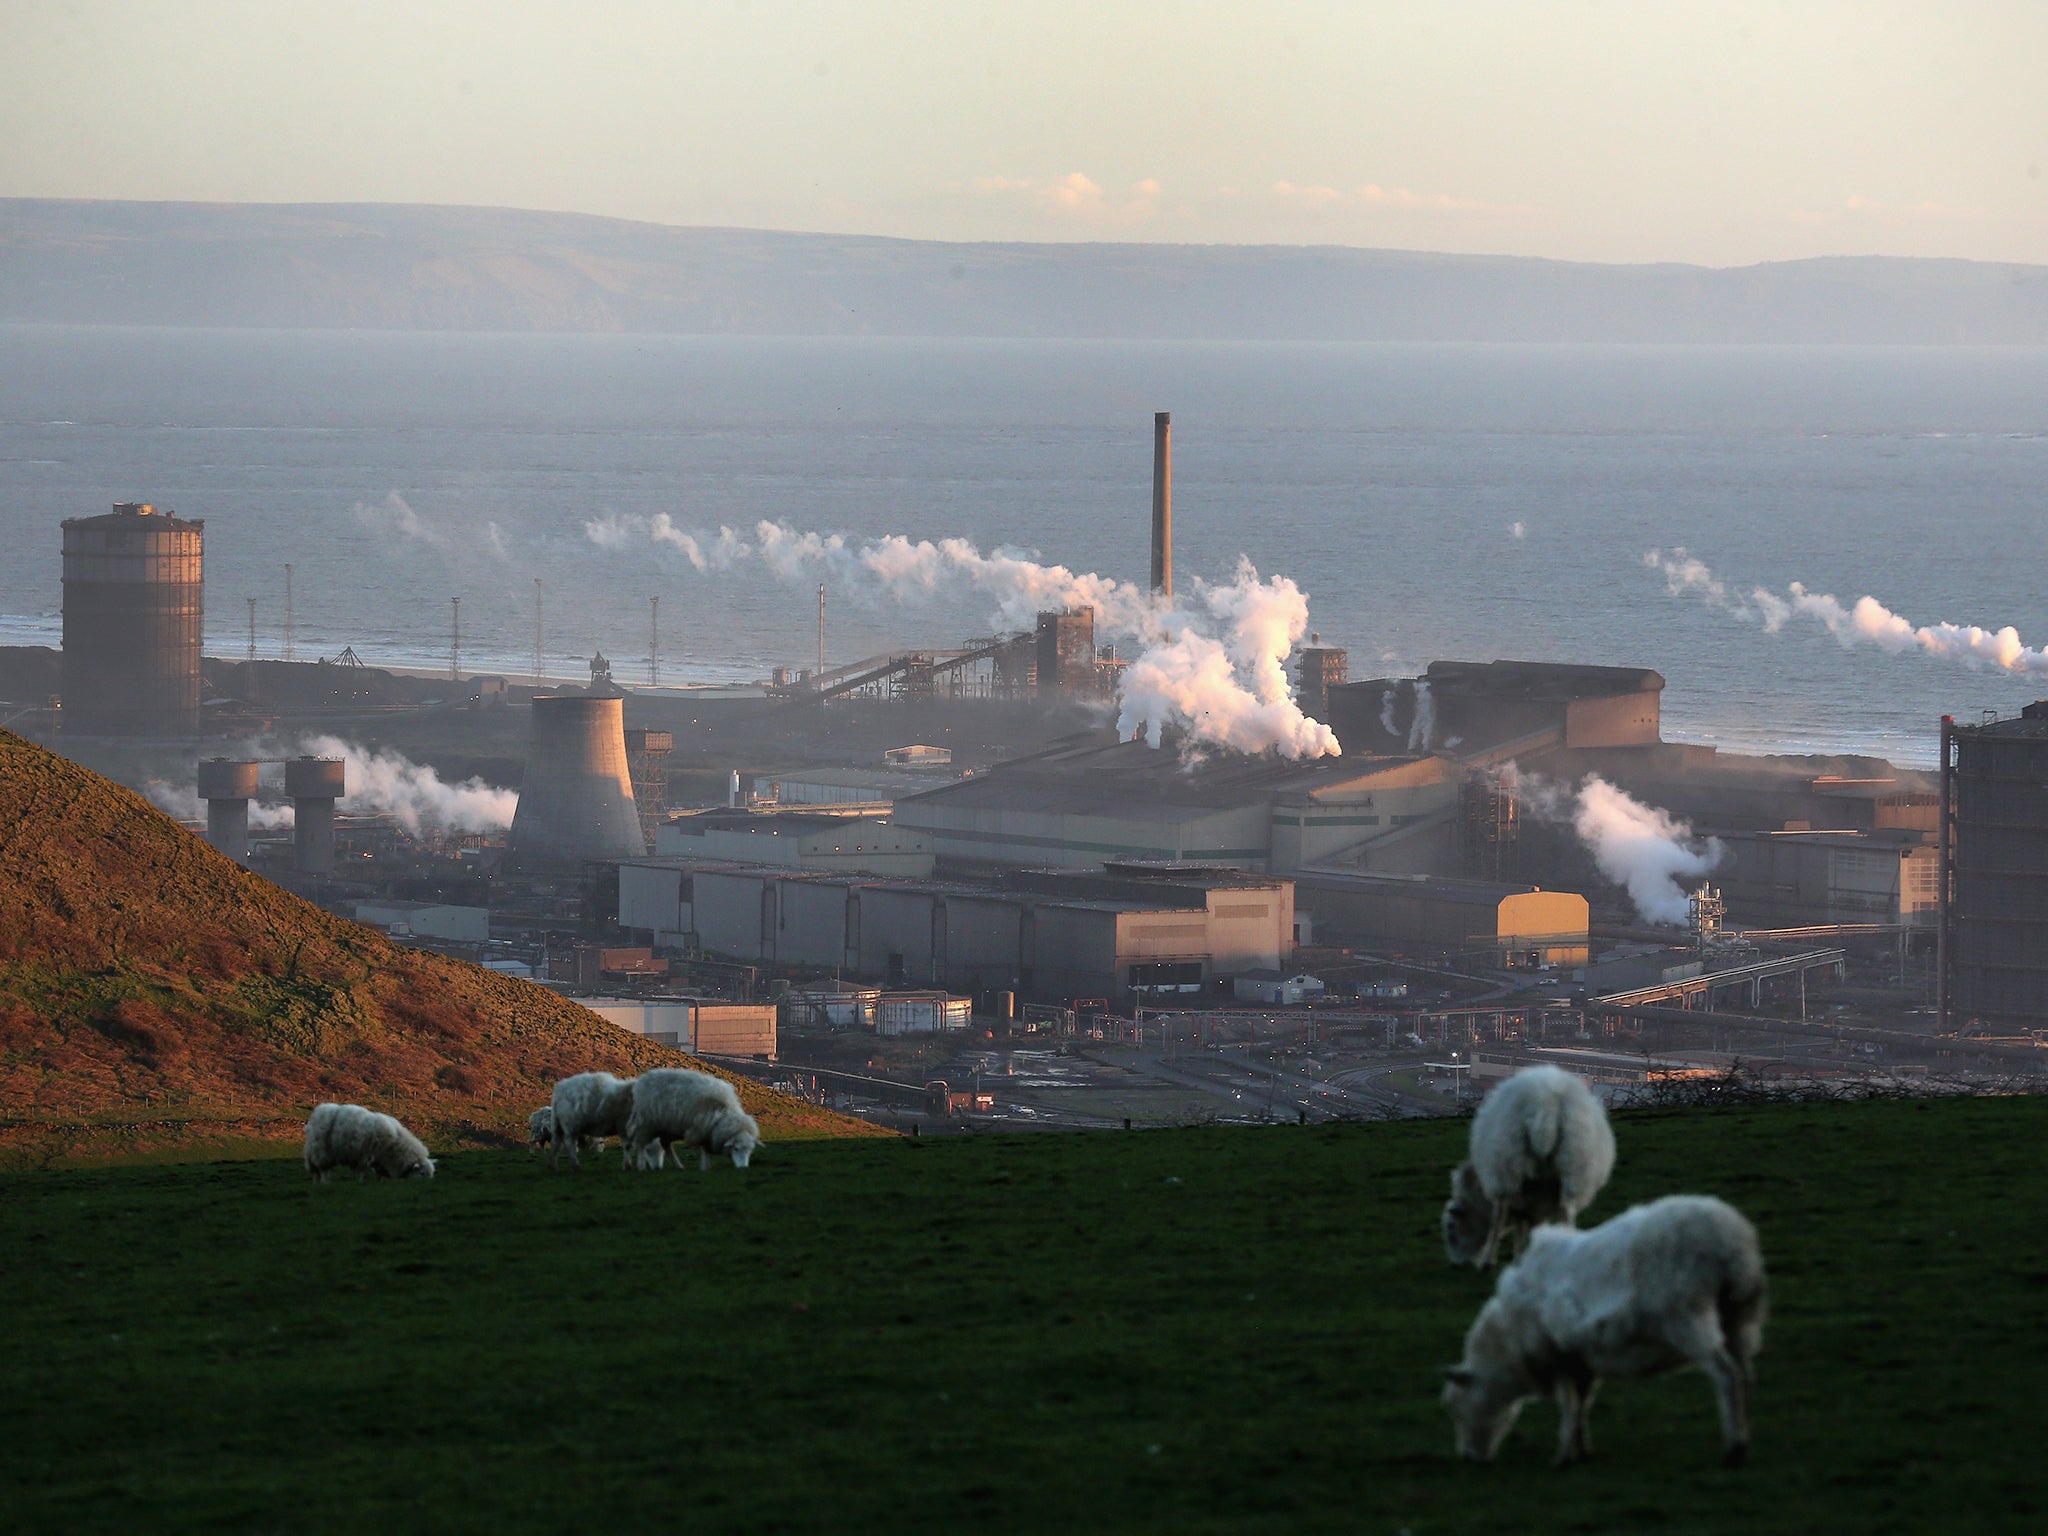 Tata Steel plant seen from the hills overlooking Port Talbot